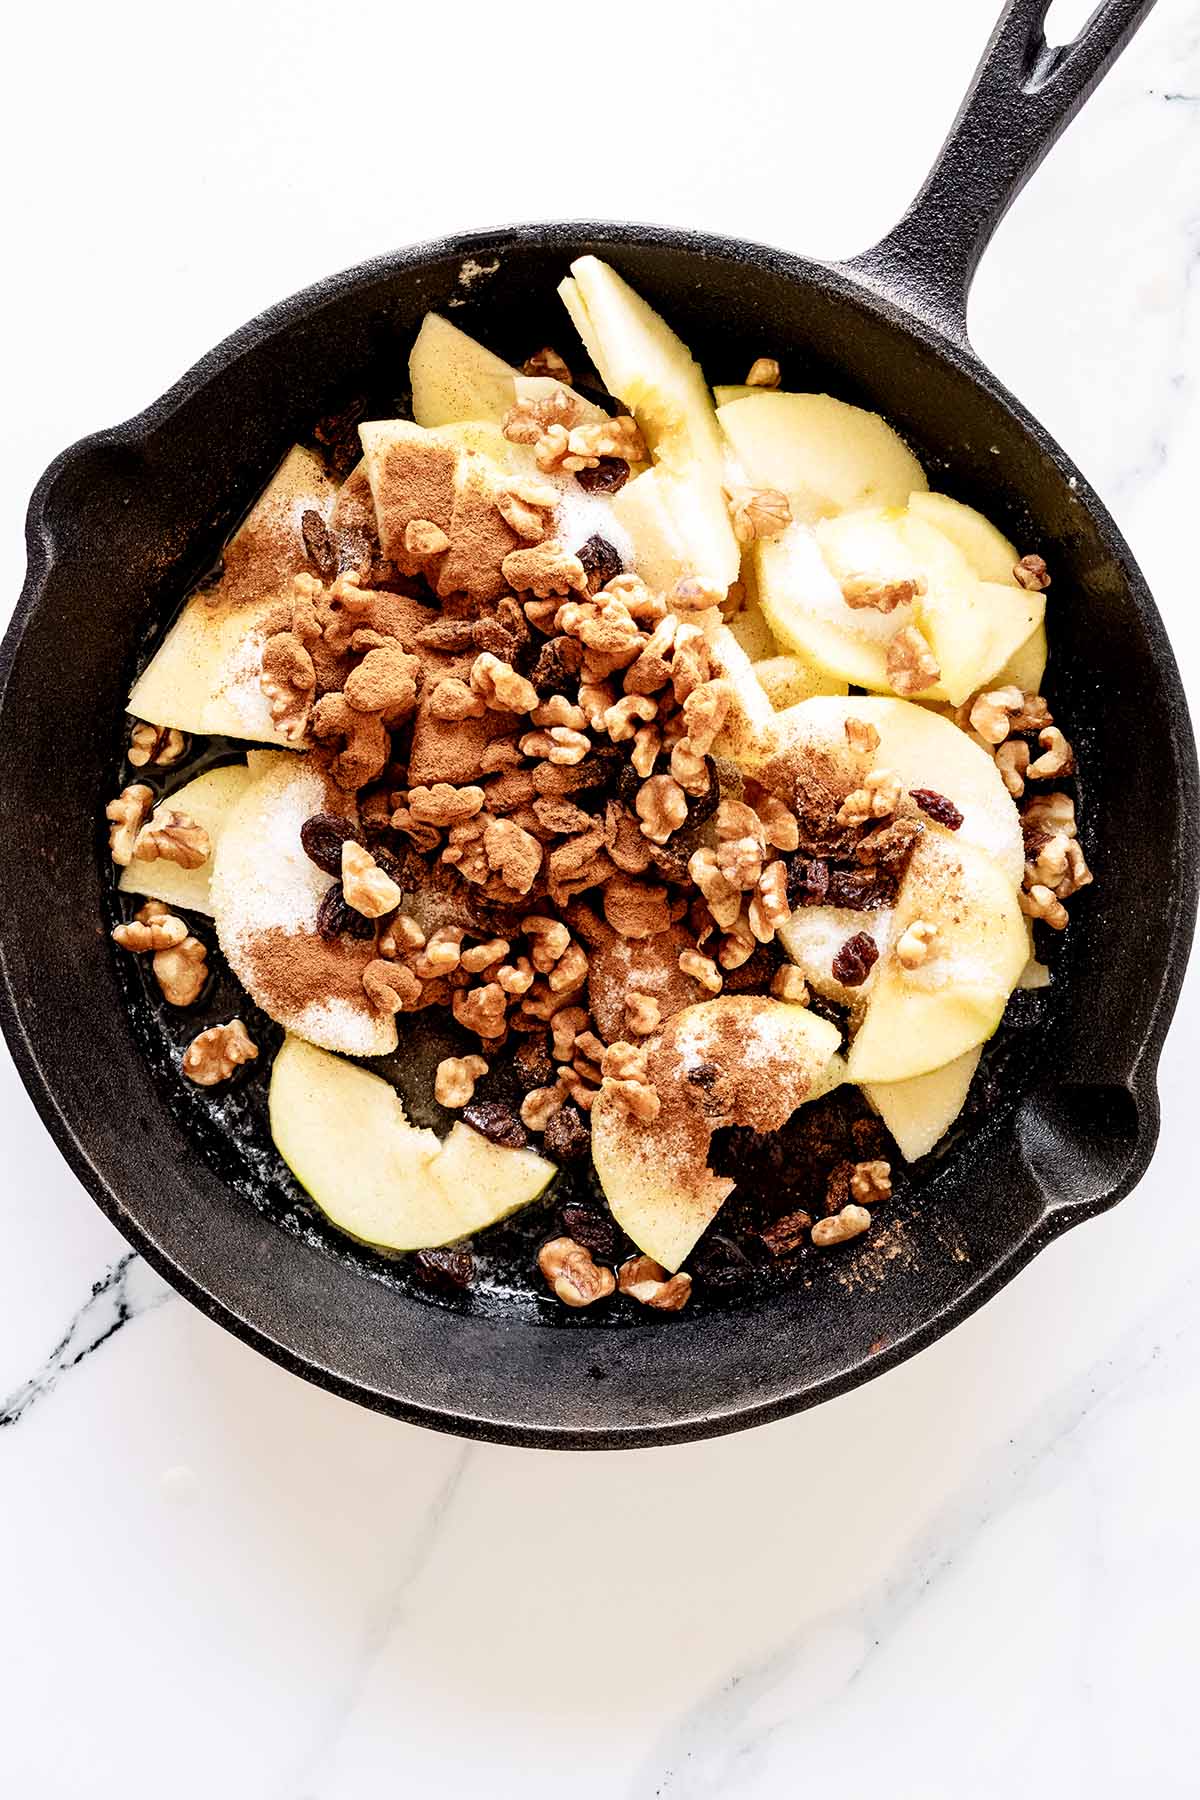 Overhead view of apples, walnuts, raisins, cinnamon and sugar in a cast iron skillet